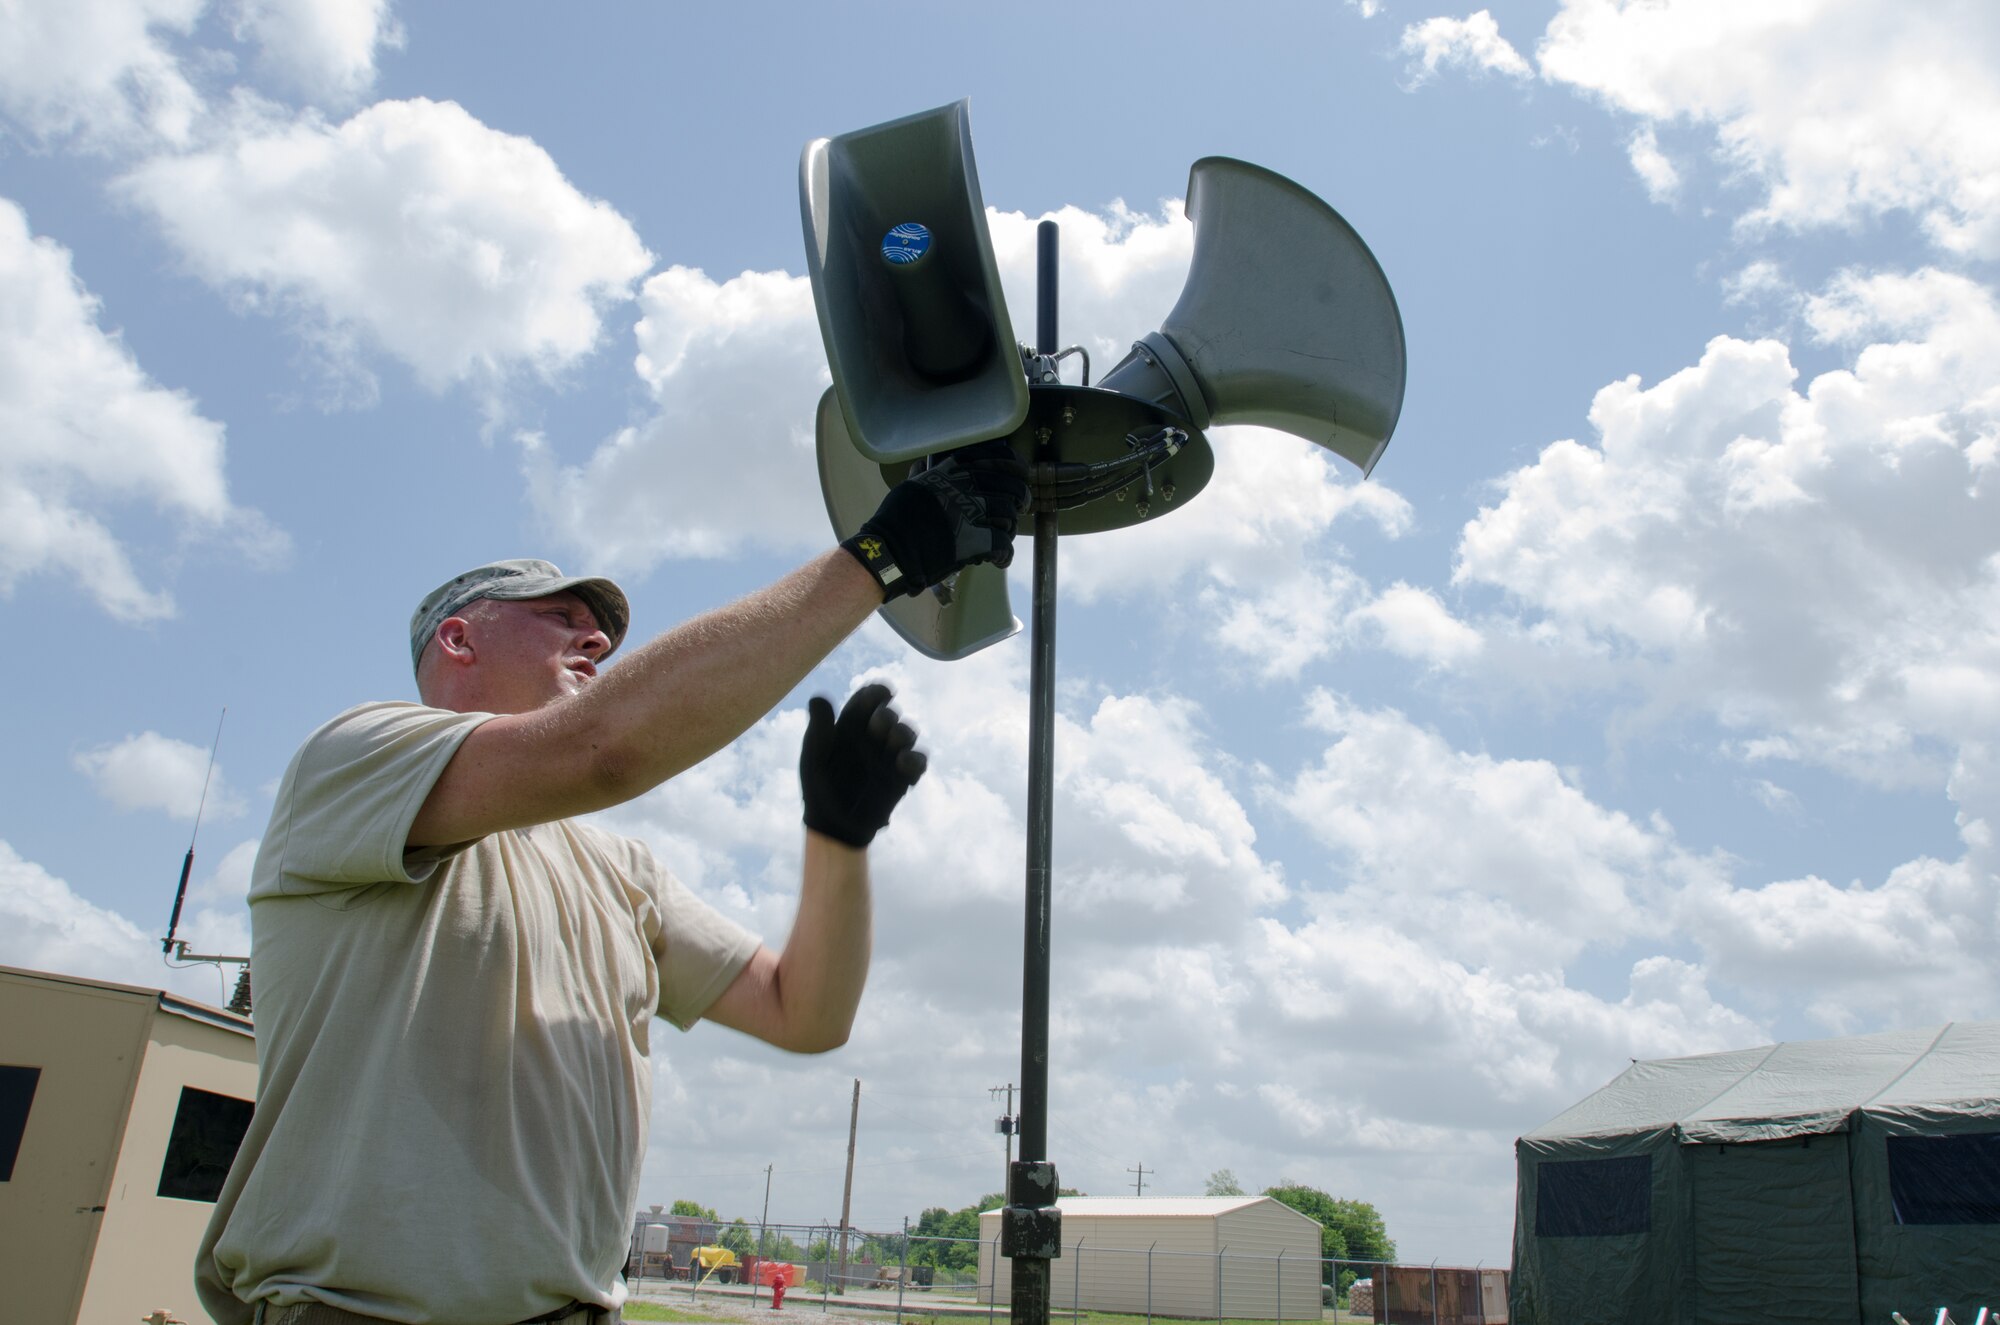 Master Sgt. Kyle Goins, a communications specialist for the Kentucky Air National Guard’s 123rd Contingency Response Group, sets up a “big voice” system at Fort Campbell, Ky., June 17, 2014, during Capstone '14, a homeland earthquake-response exercise. The 123rd CRG joined forces with the U.S. Army’s 688th Rapid Port Opening Element to operate a Joint Task Force-Port Opening here from June 16 to 19, 2014. (U.S. Air National Guard photo by Master Sgt. Phil Speck)